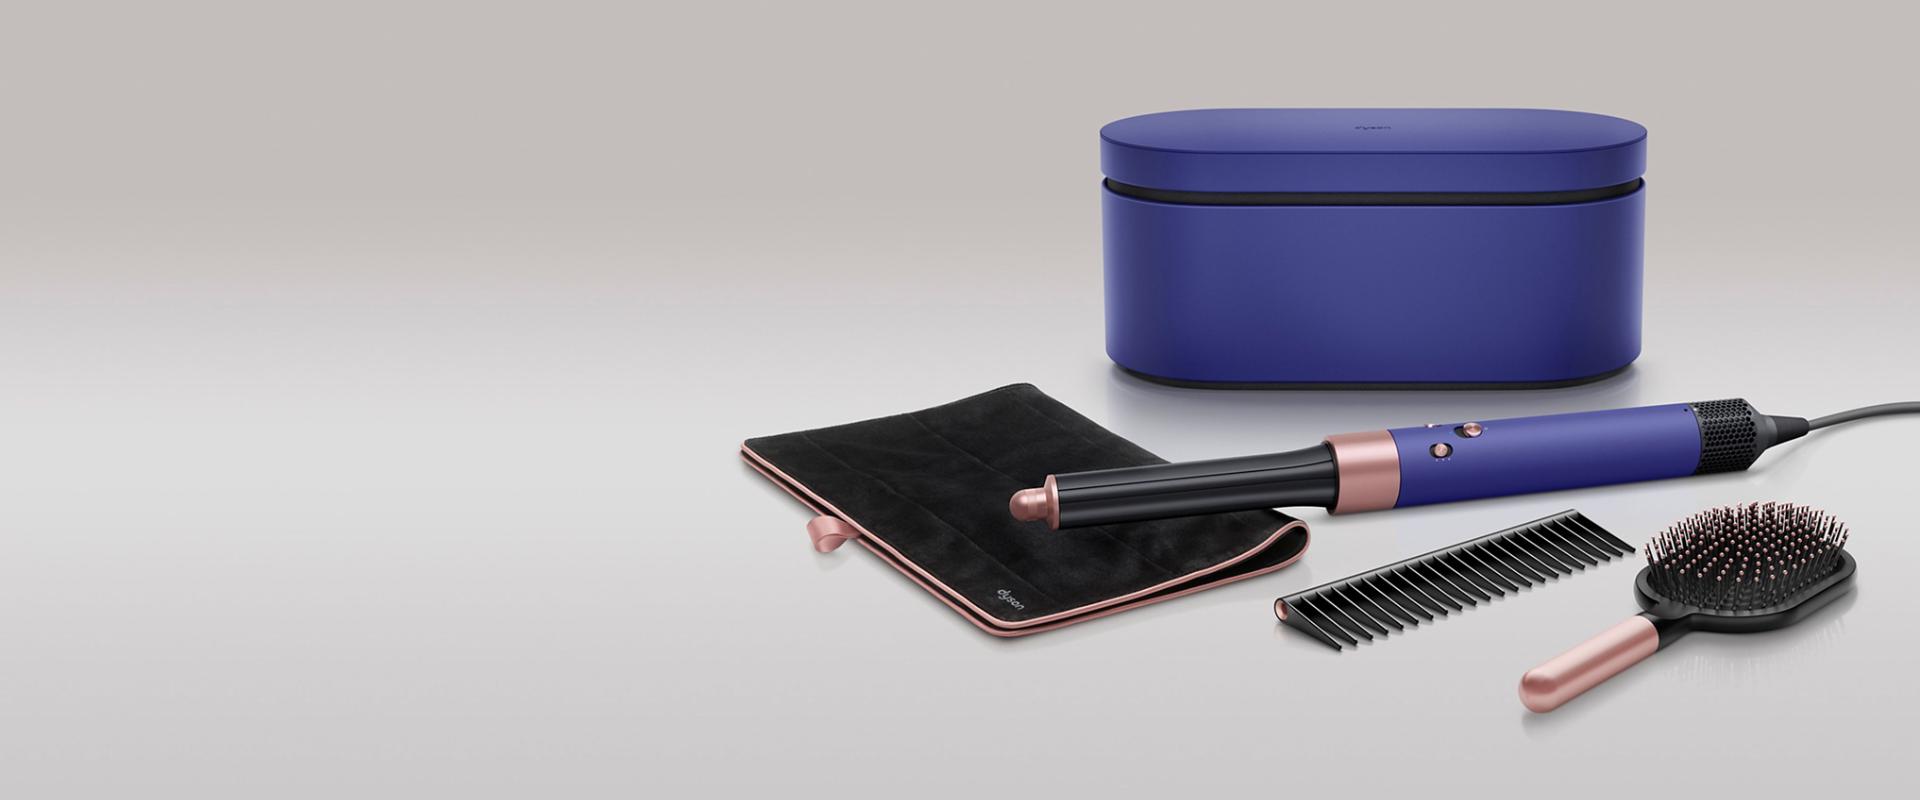 Dyson Airwrap multi-styler in Vinca blue and Rosé with travel pouch, presentation case, detangling comb and paddle brush.